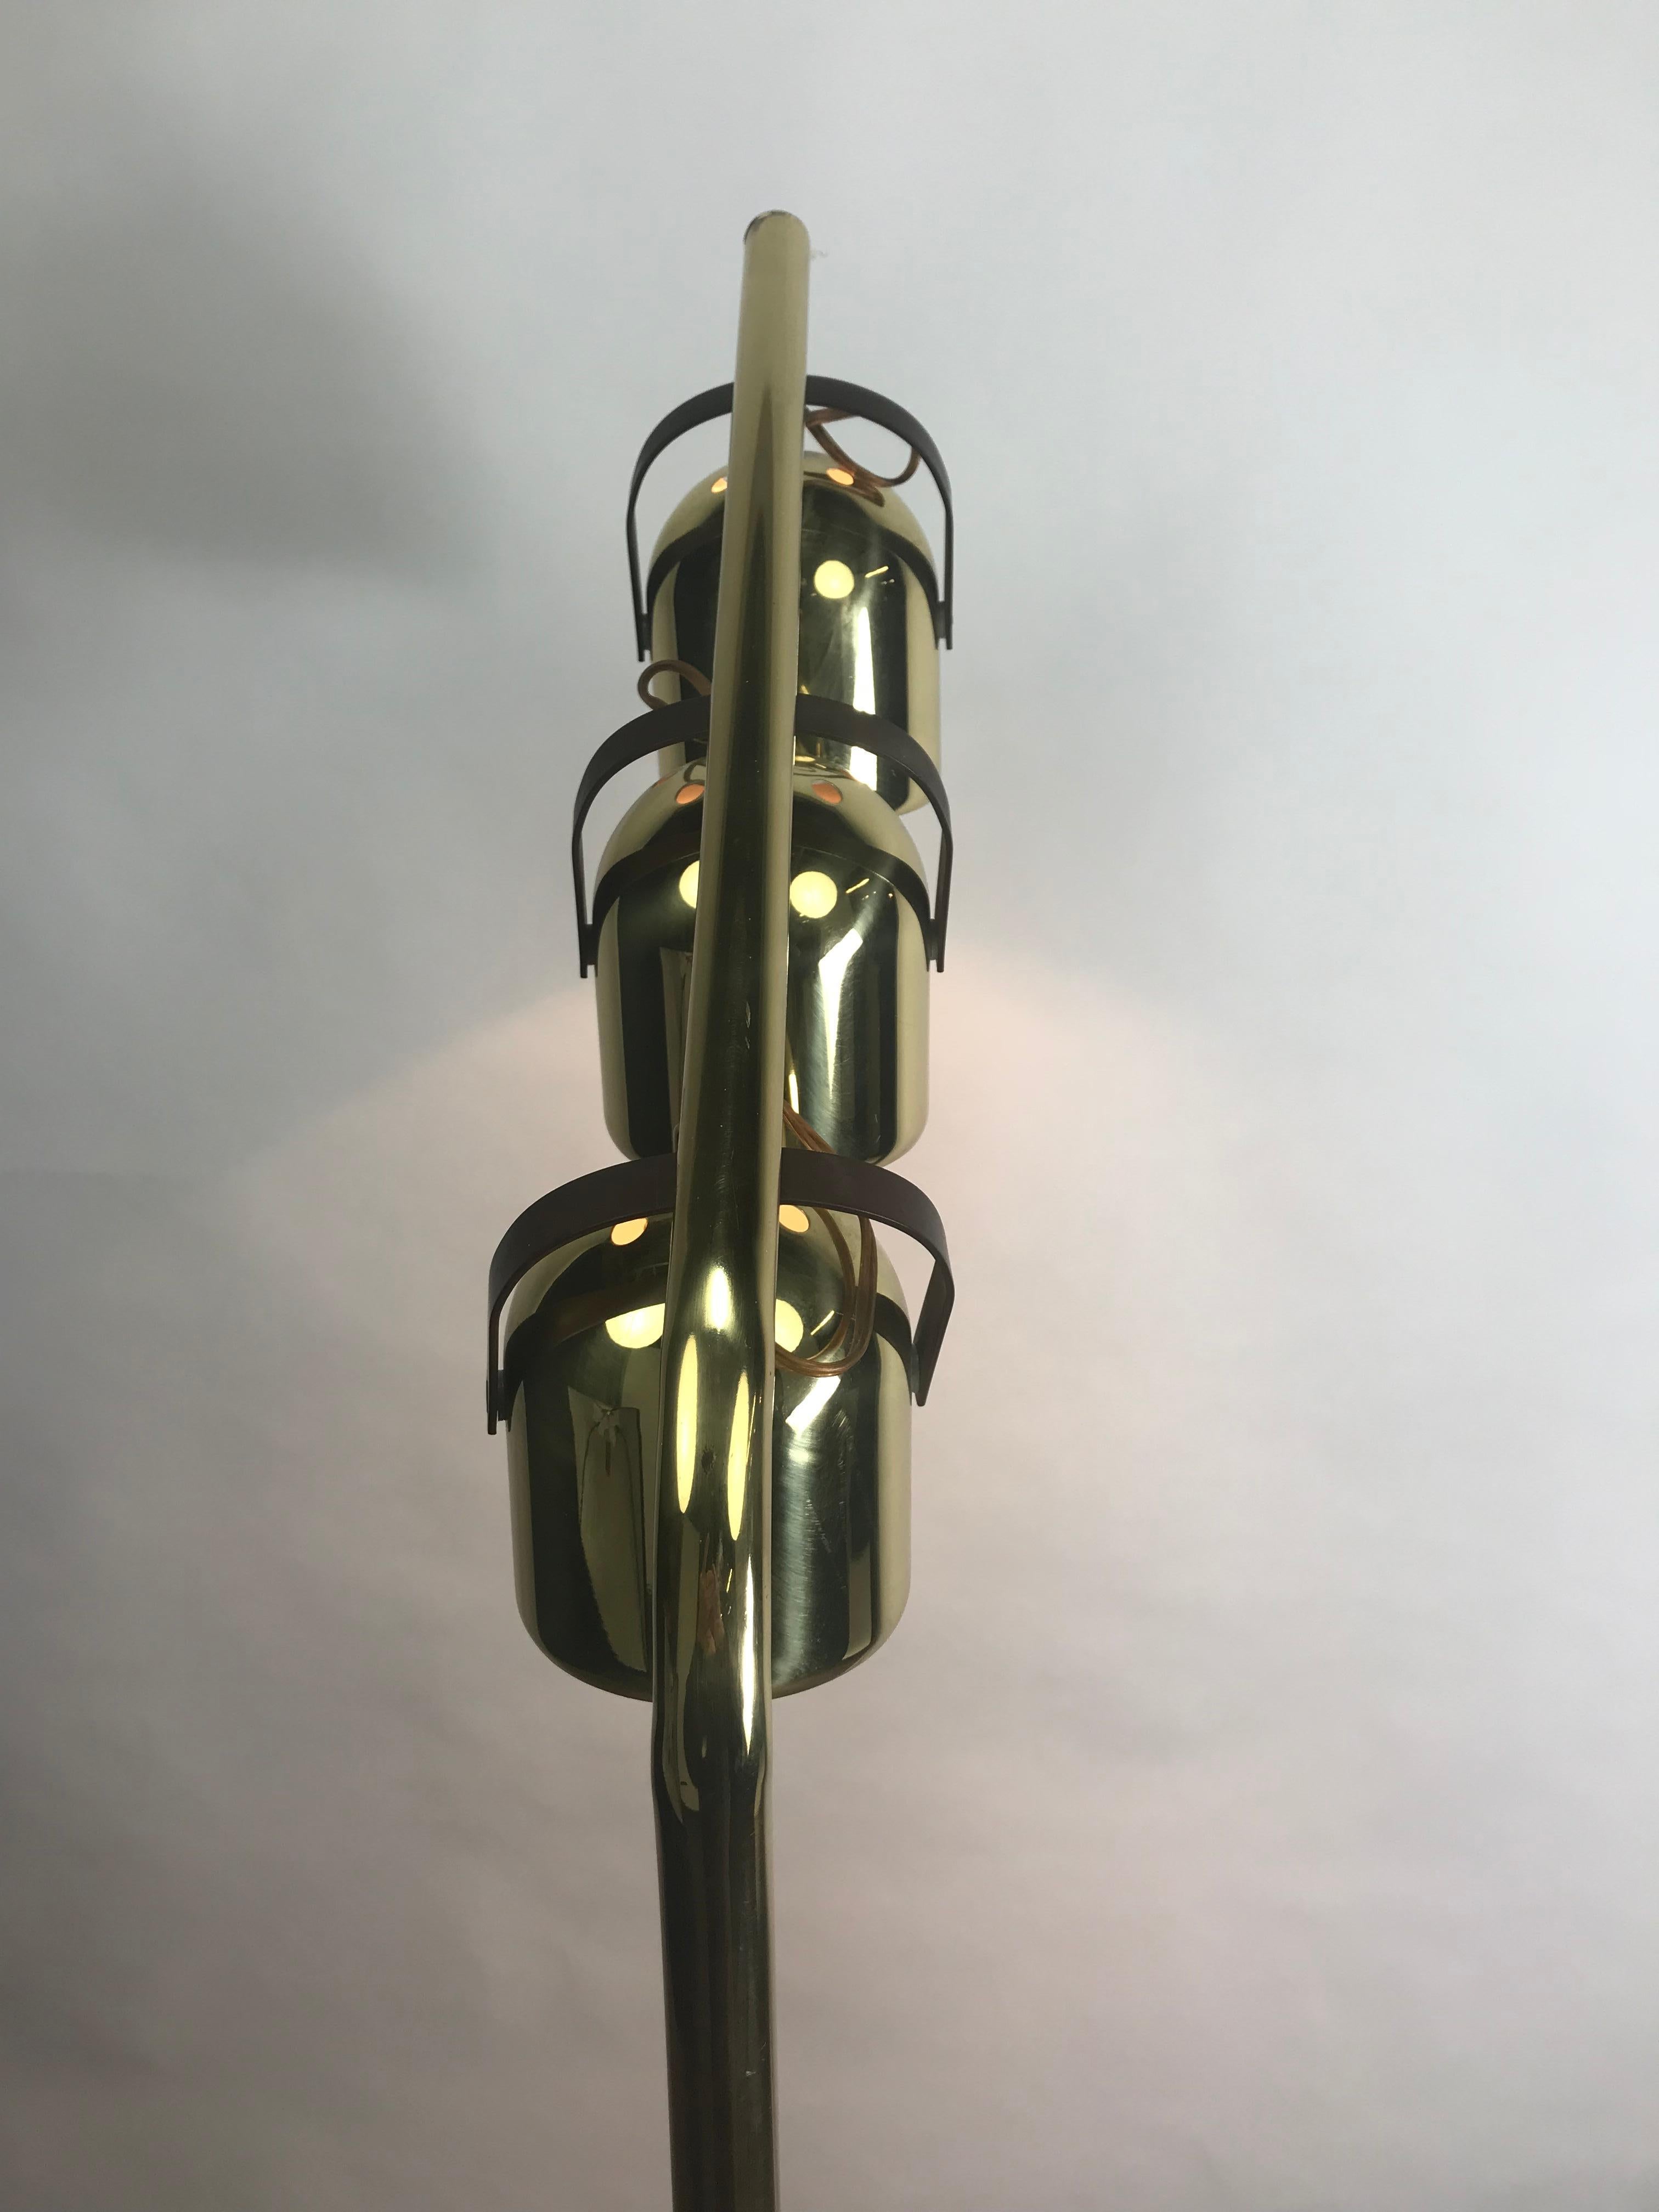 Stunning Space Age brass floor lamp with 3 adjustable spot lights by Clover Lamp Company, which produced modern lamps often modeled after Italian designs like those from Reggiani. They were located in Pennsylvania & Clover name is on underside of